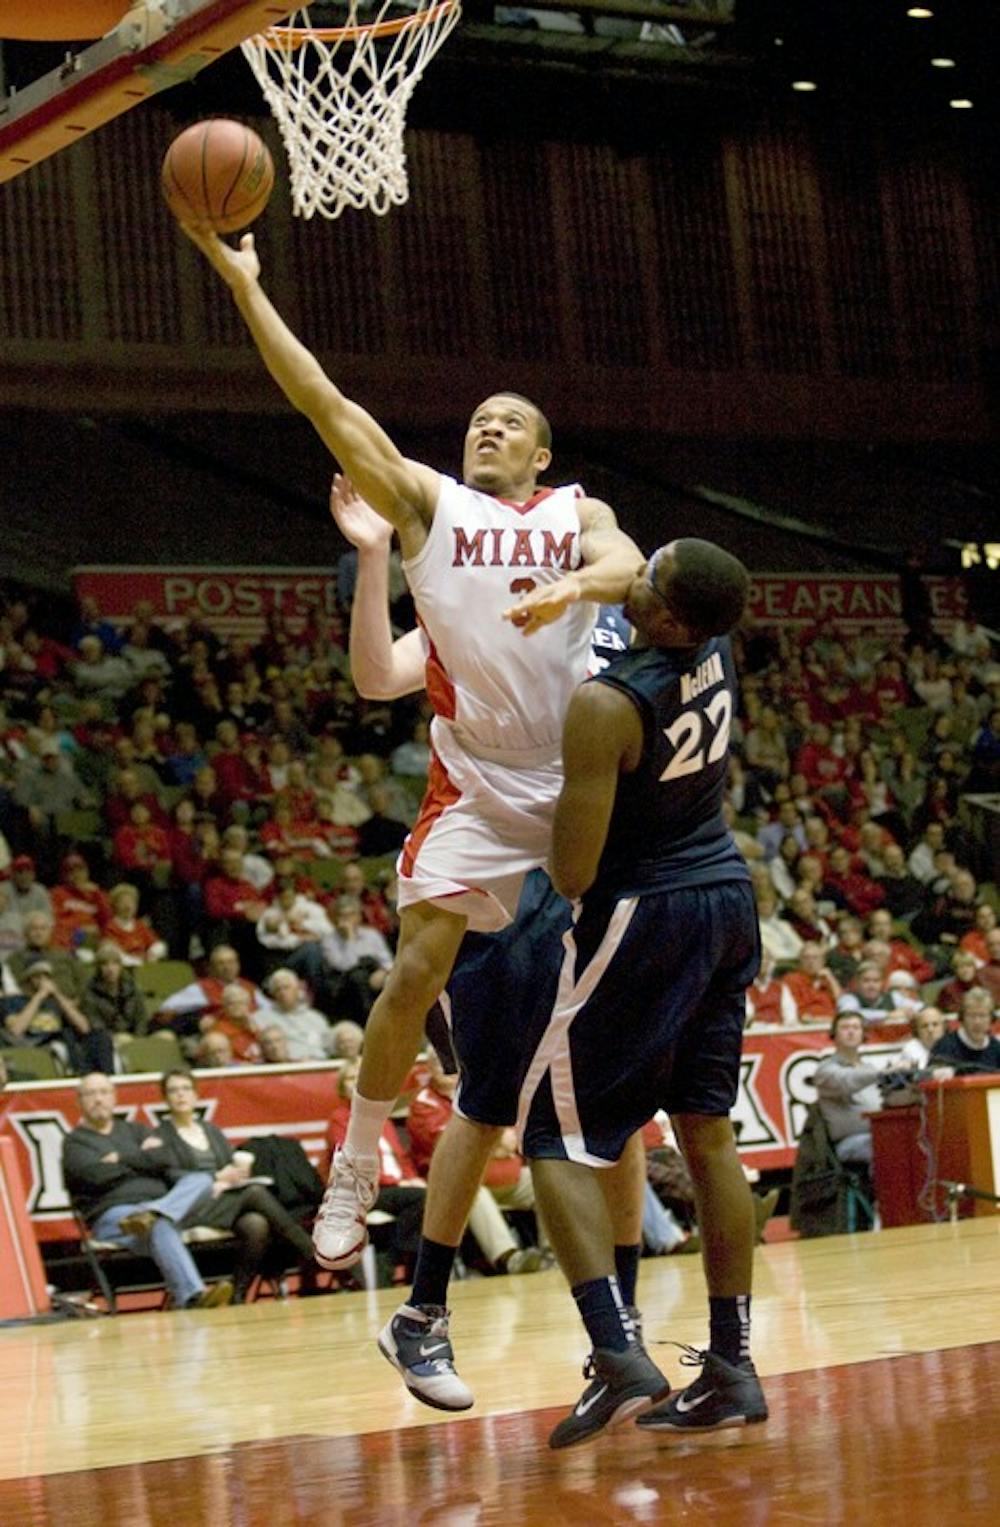 Sophomore guard Allen Roberts goes for a layup during the game versus Xavier University on Tuesday at Millett Hall.